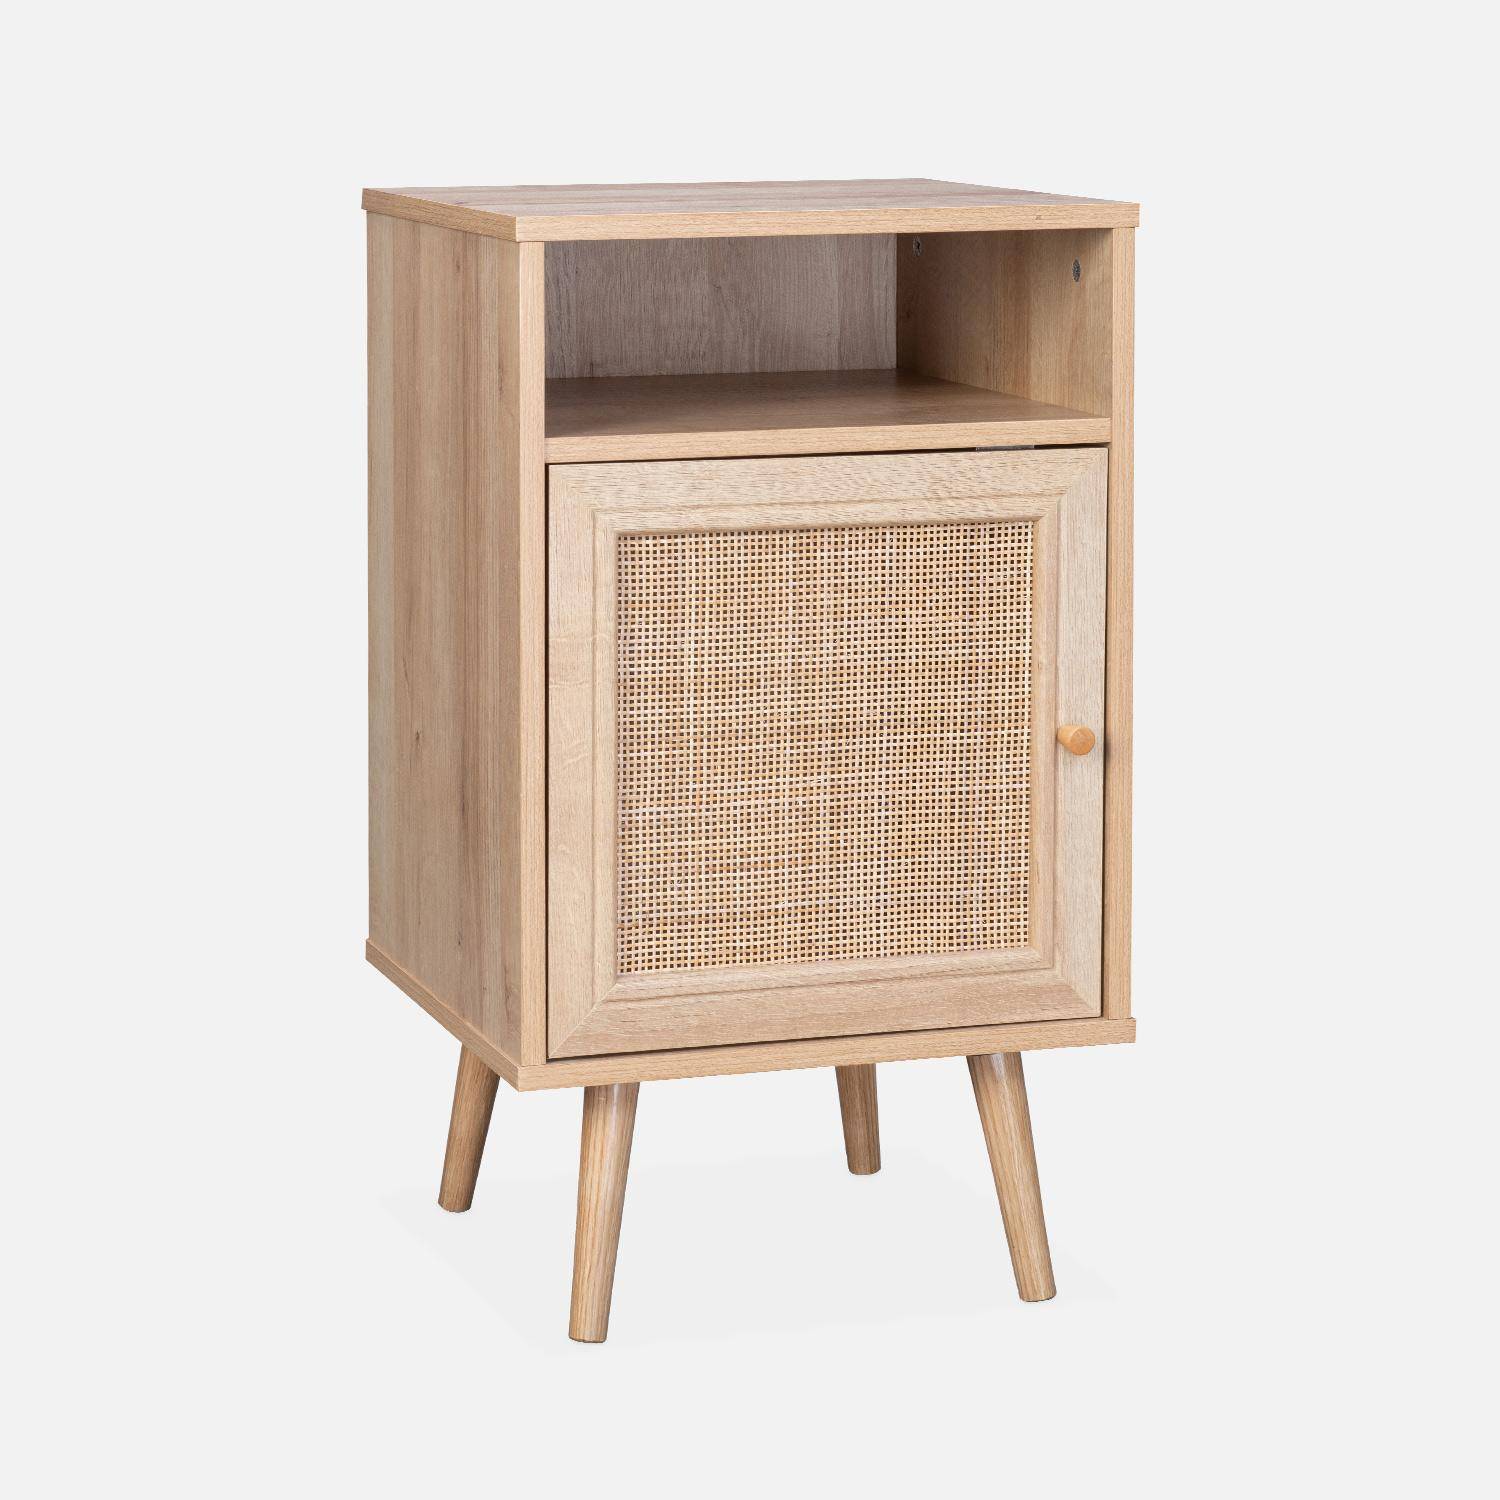 Pair of Scandi-style wood and cane rattan bedside tables with cupboard, 40x39x70cm - Boheme - Natural Wood colour Photo5